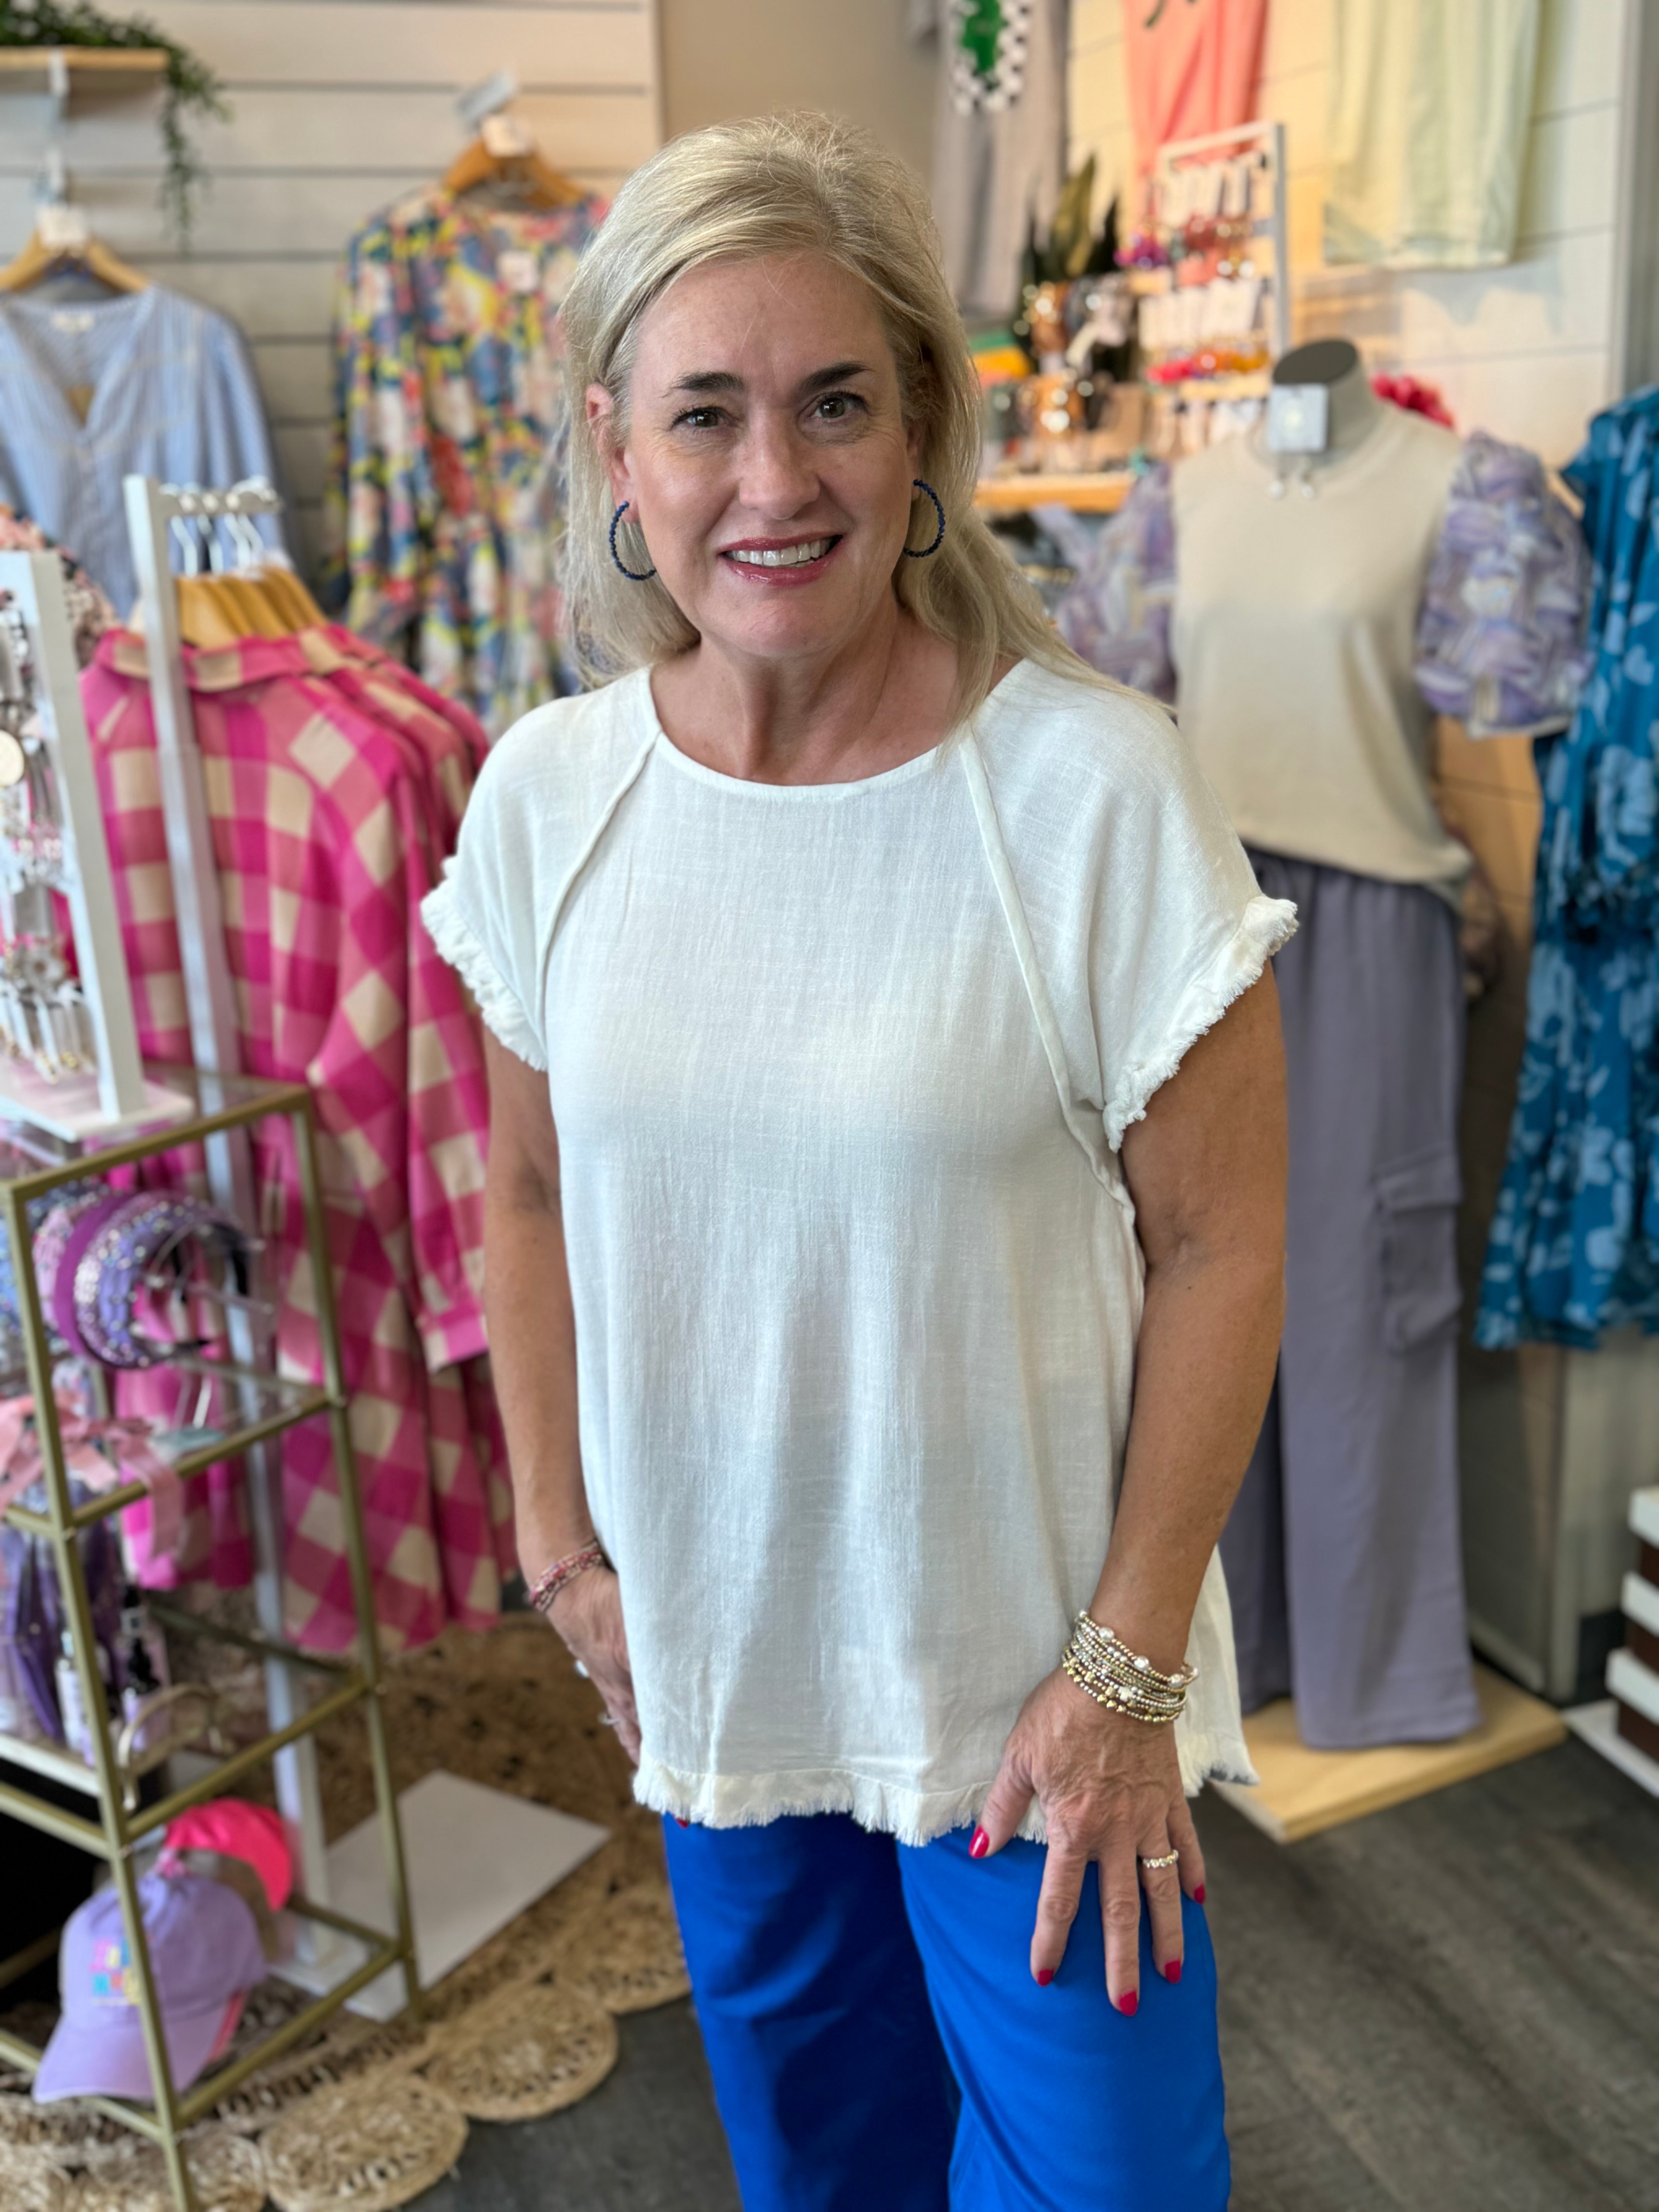 Take a Break Short Sleeve Top-The Lovely Closet-The Lovely Closet, Women's Fashion Boutique in Alexandria, KY